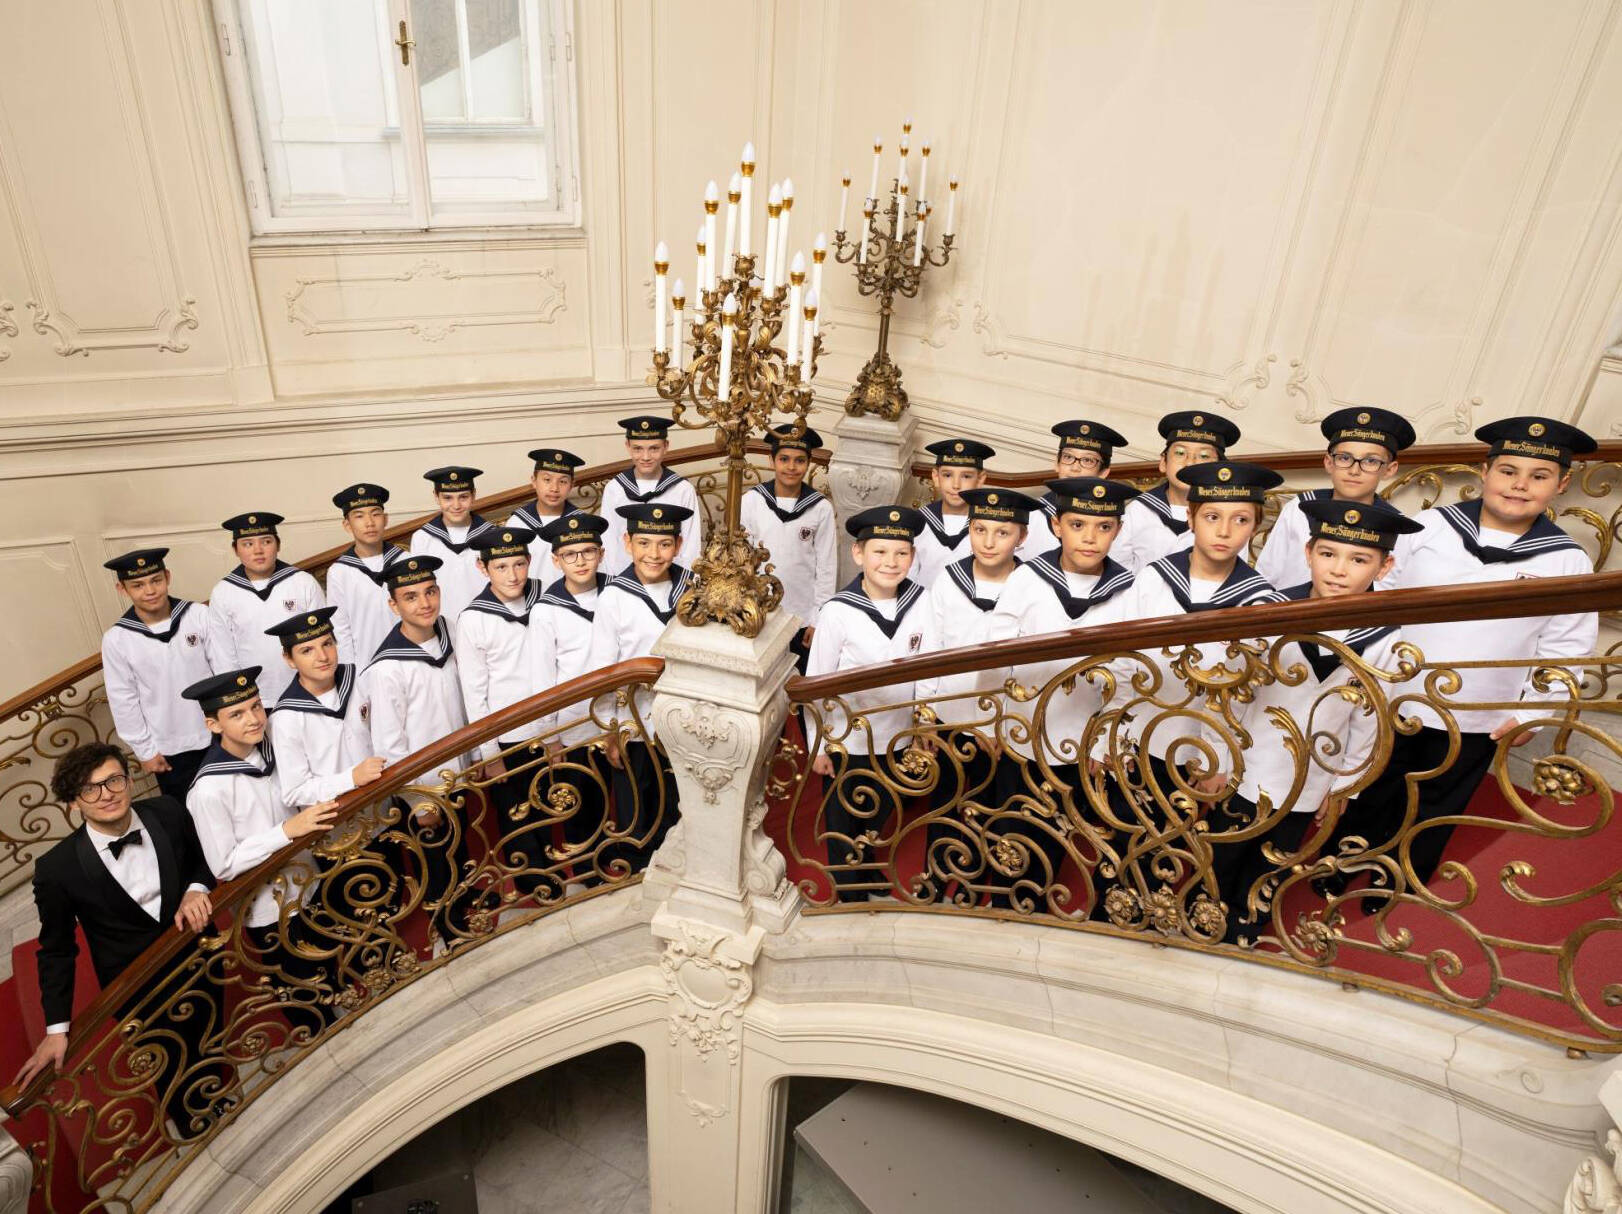 The Vienna Boys Choir will perform Oct. 17 at the Kentwood Performing Arts Center as part of the city of Kent Spotlight Series. COURTESY PHOTO, City of Kent